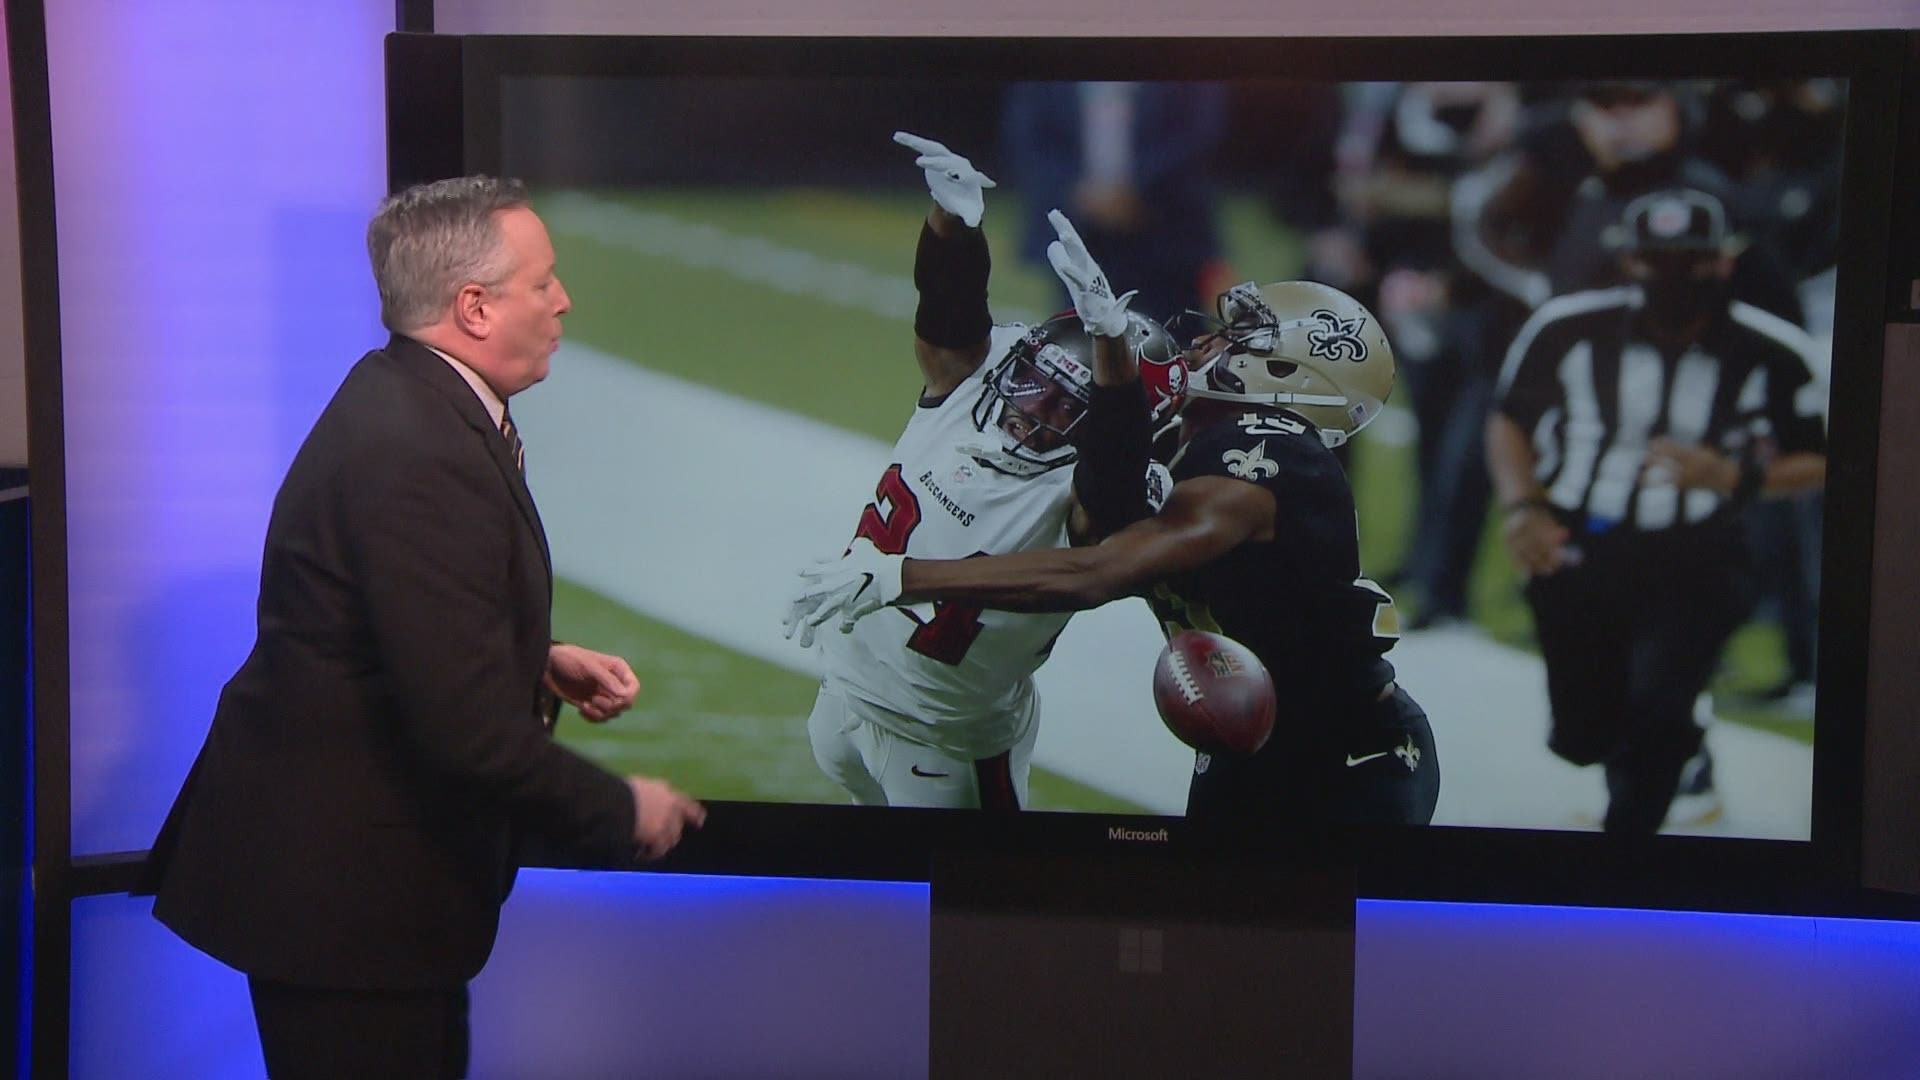 Doug Mouton has the breakdown of the Saints final game this season and a look at what Drew Brees brought to the Saints over the years.